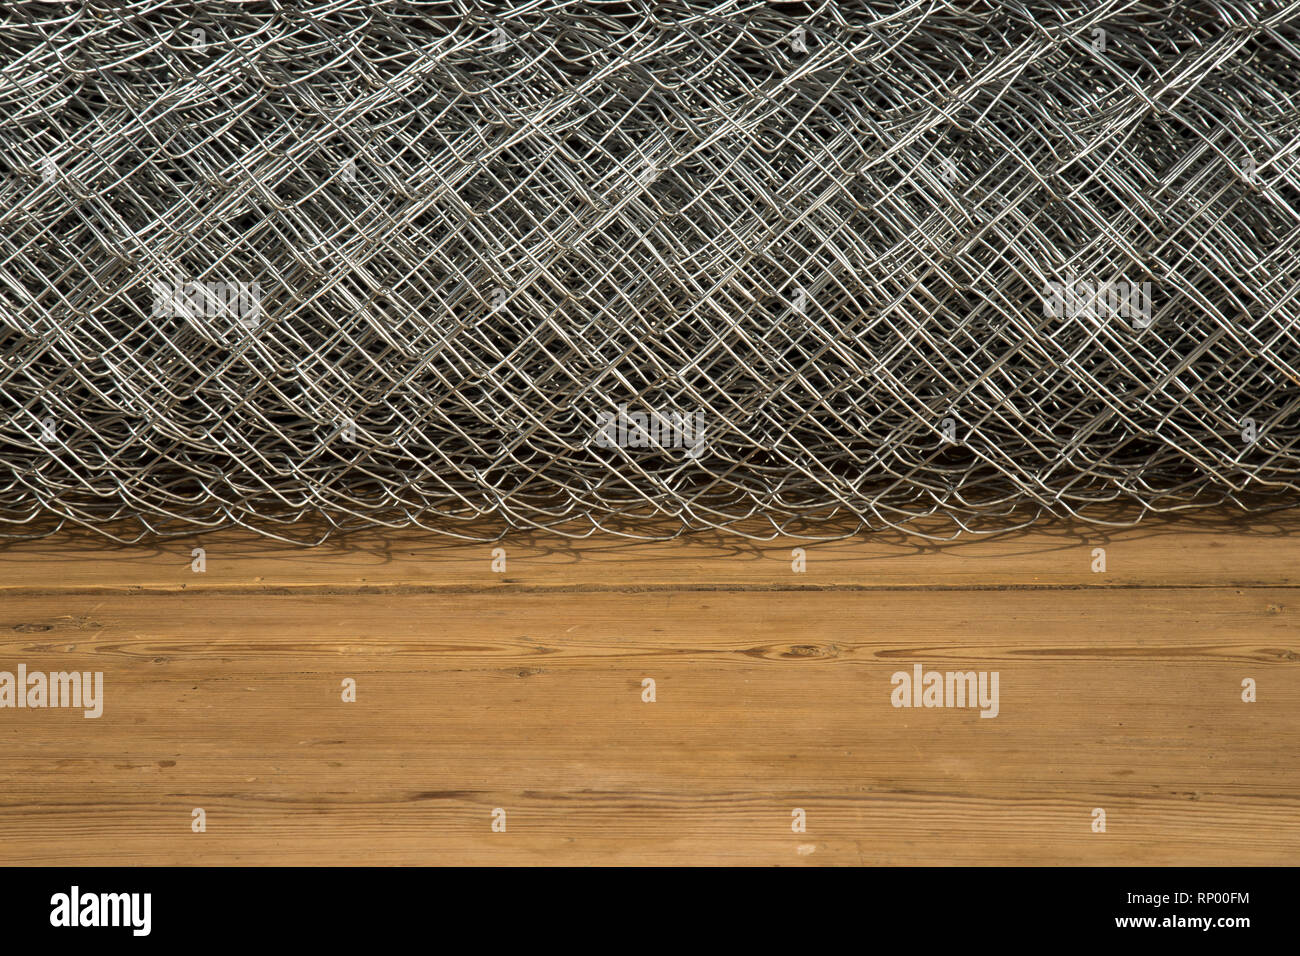 Rabitz grid in a roll on a wooden background Stock Photo